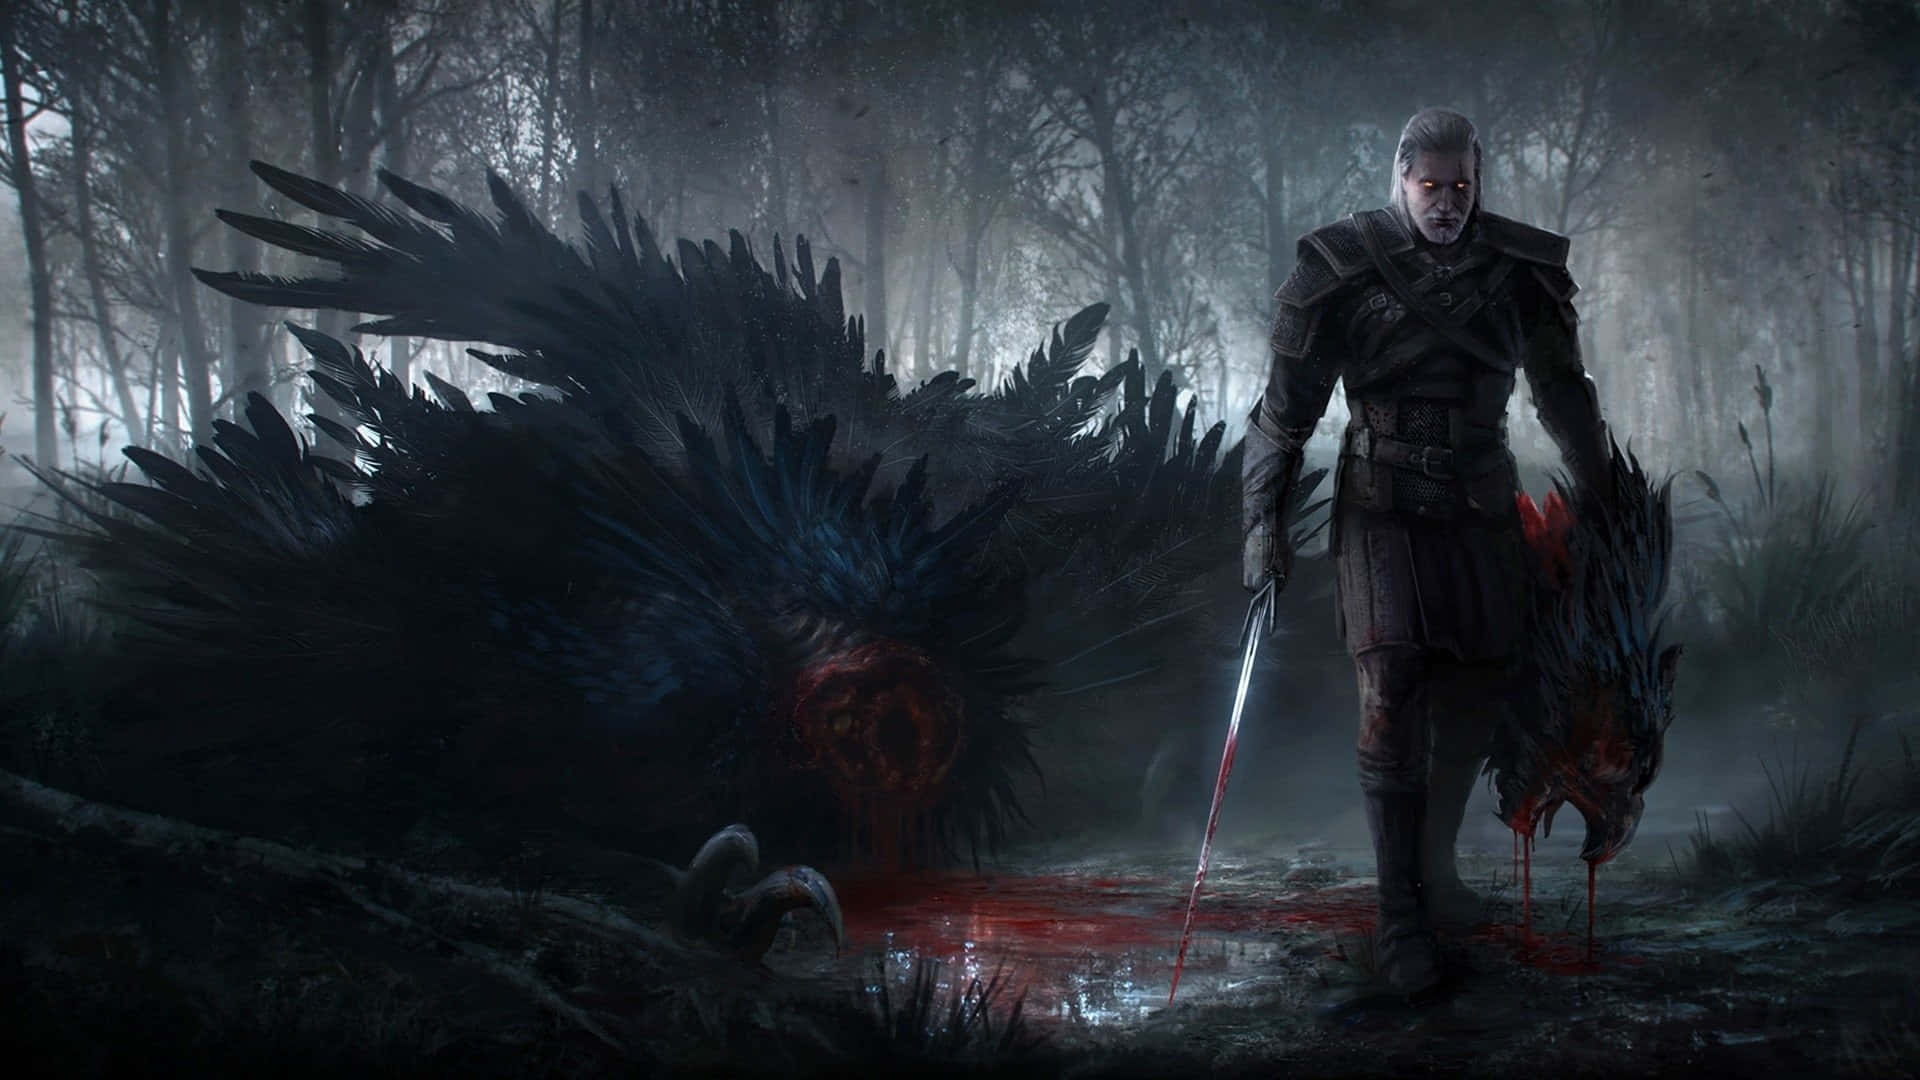 Follow Geralt of Rivia on an Epic Adventure in Witcher 3